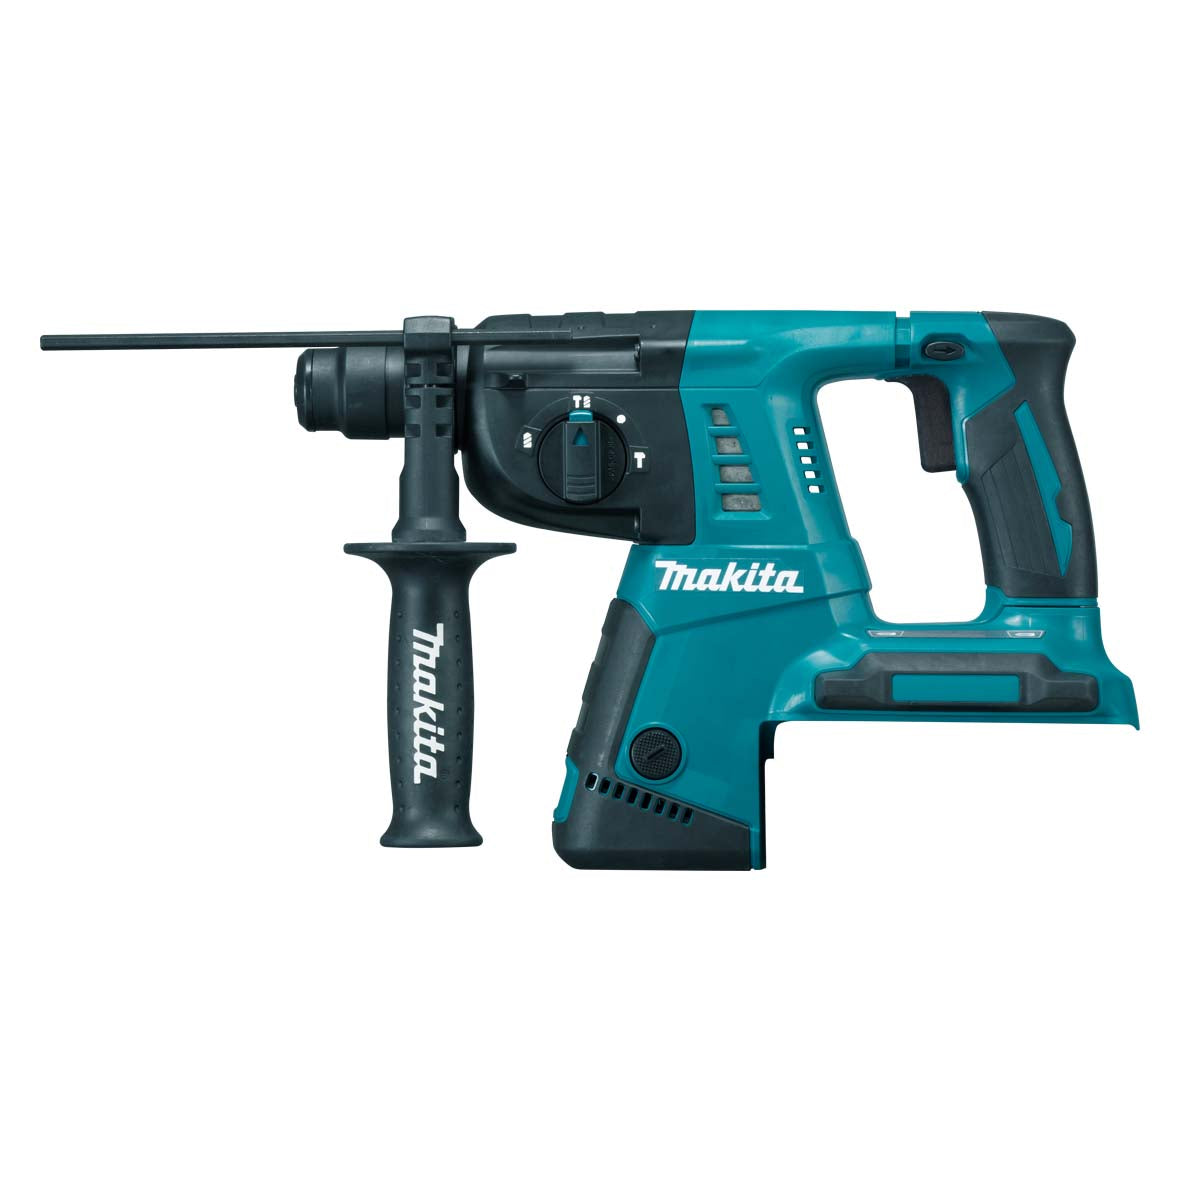 18Vx2 26mm Brushless SDS Plus Rotary Hammer Bare (Tool Only) DHR263Z by Makita